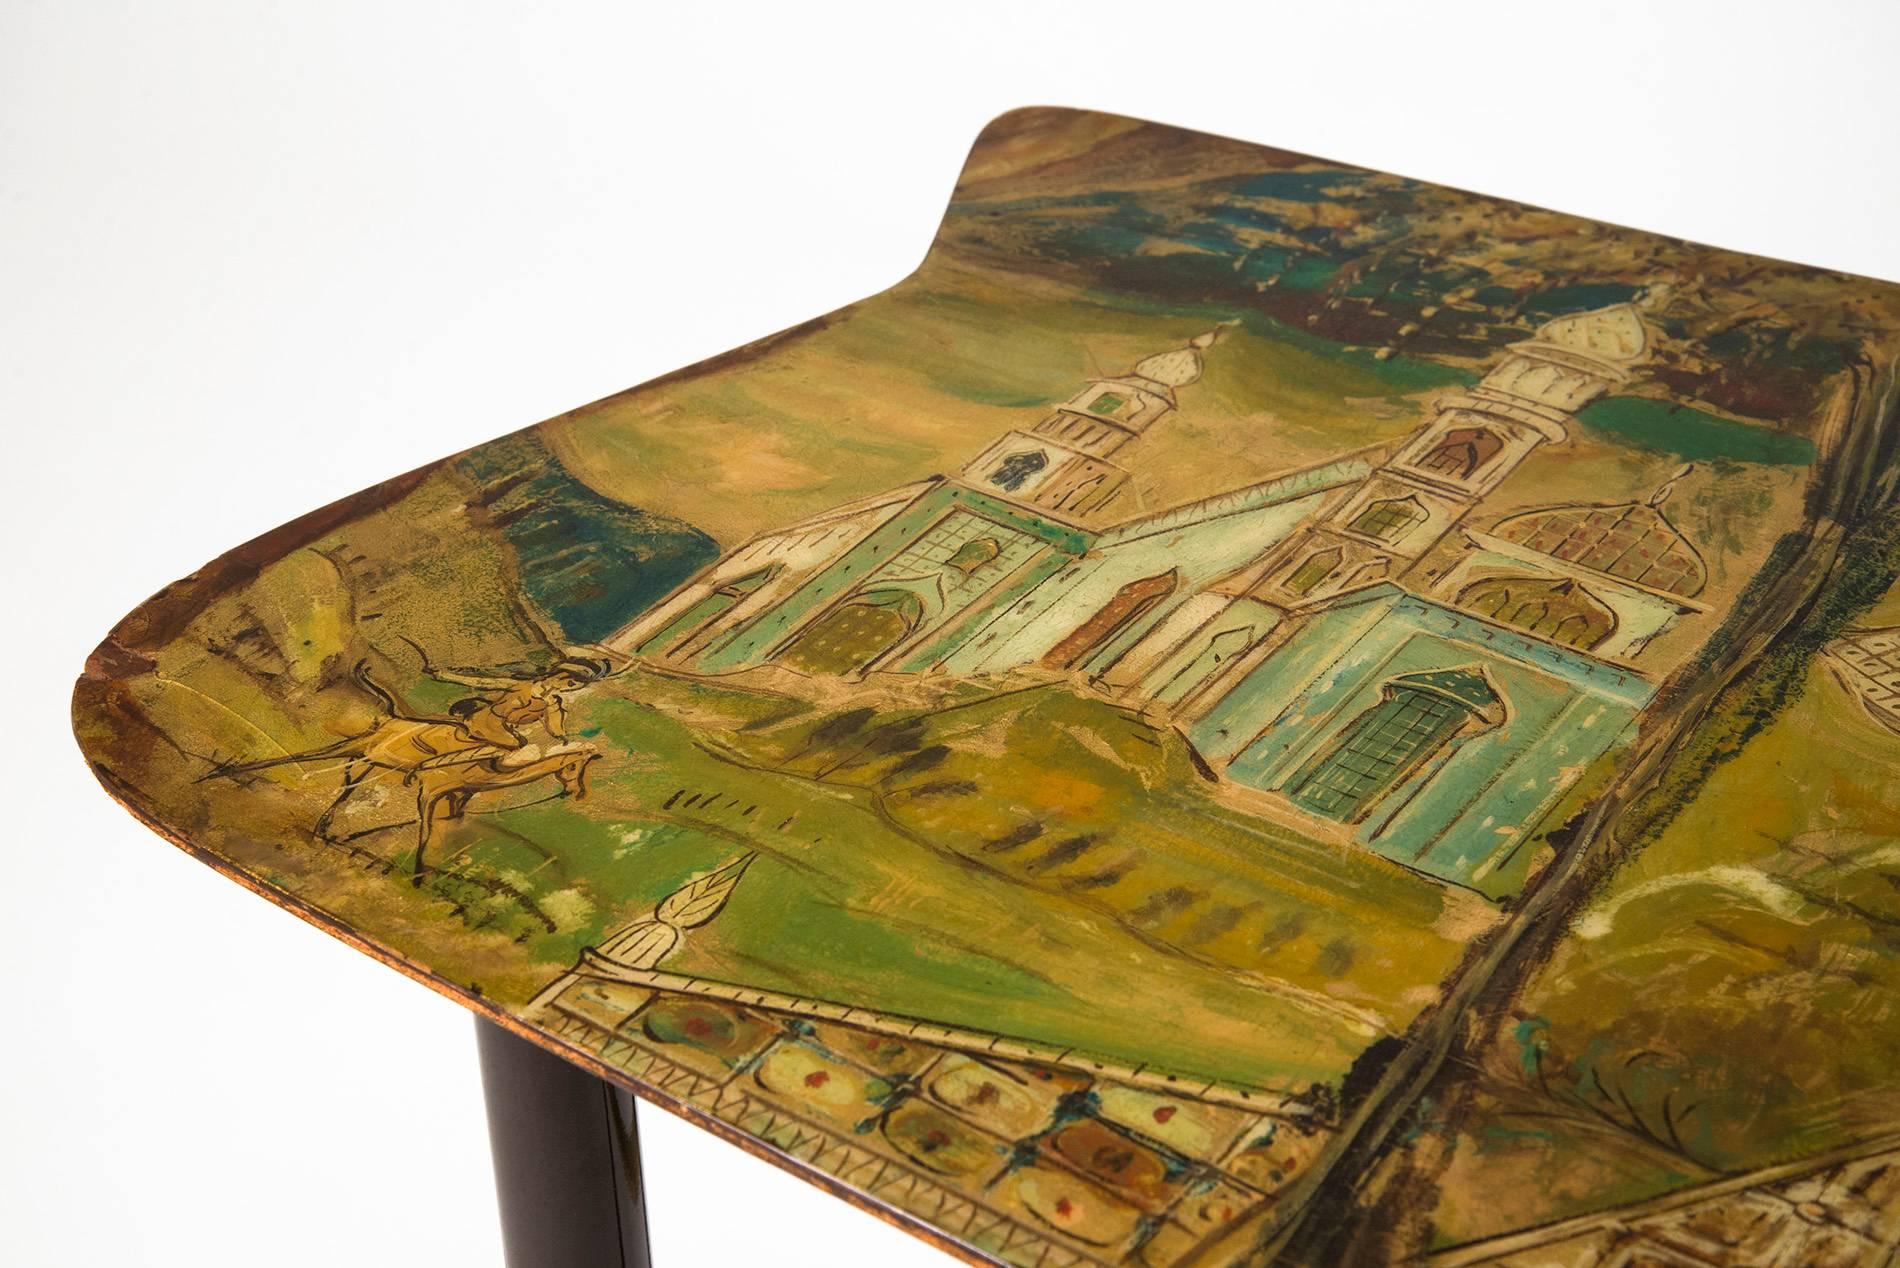 Italian Extraordinary Hand-Painted Low Table by Decalage, Turin, 1956